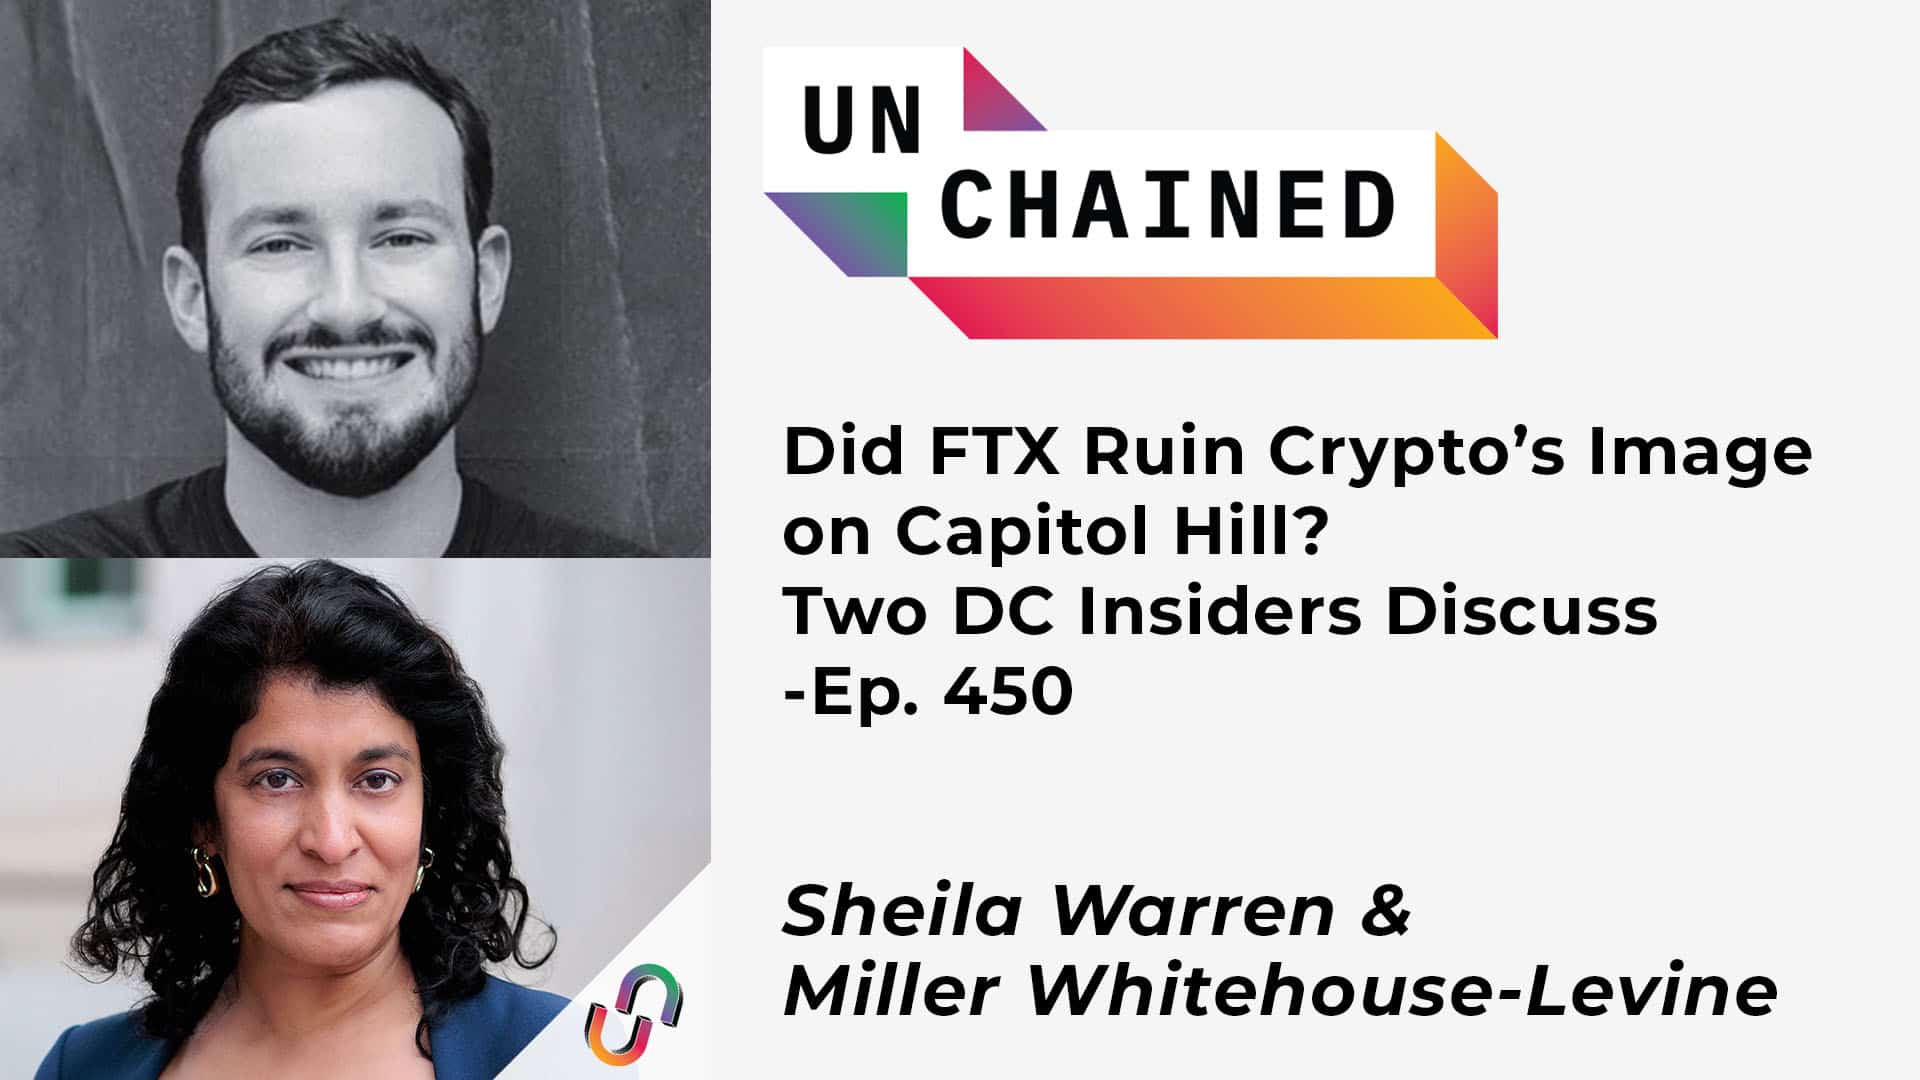 Did FTX Ruin Crypto’s Image on Capitol Hill? Two DC Insiders Discuss - Ep. 450